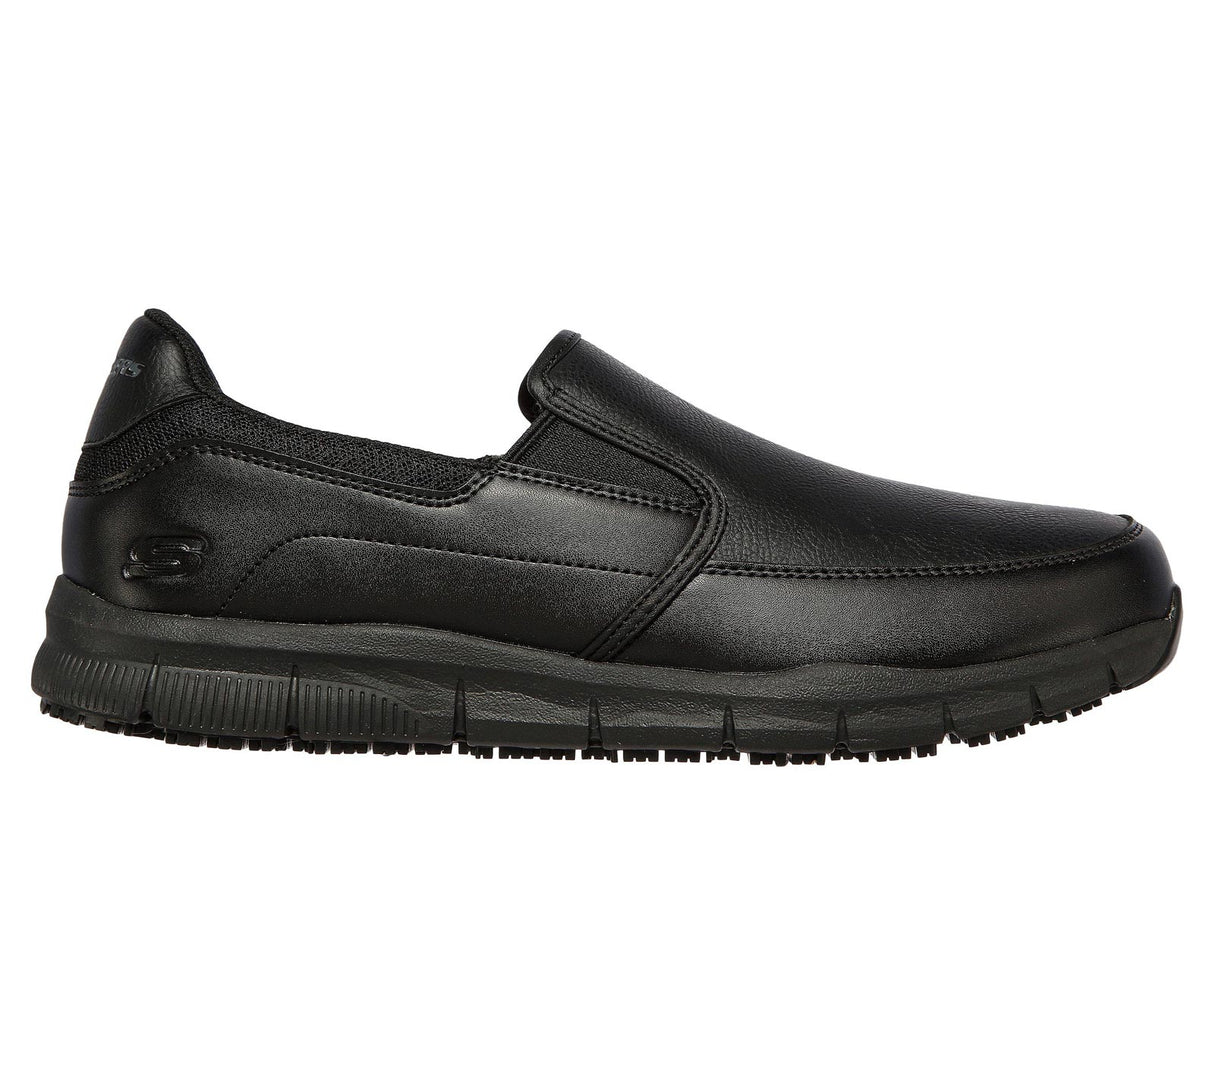 Skechers Work Relaxed Fit Mens Slip-On Shoes